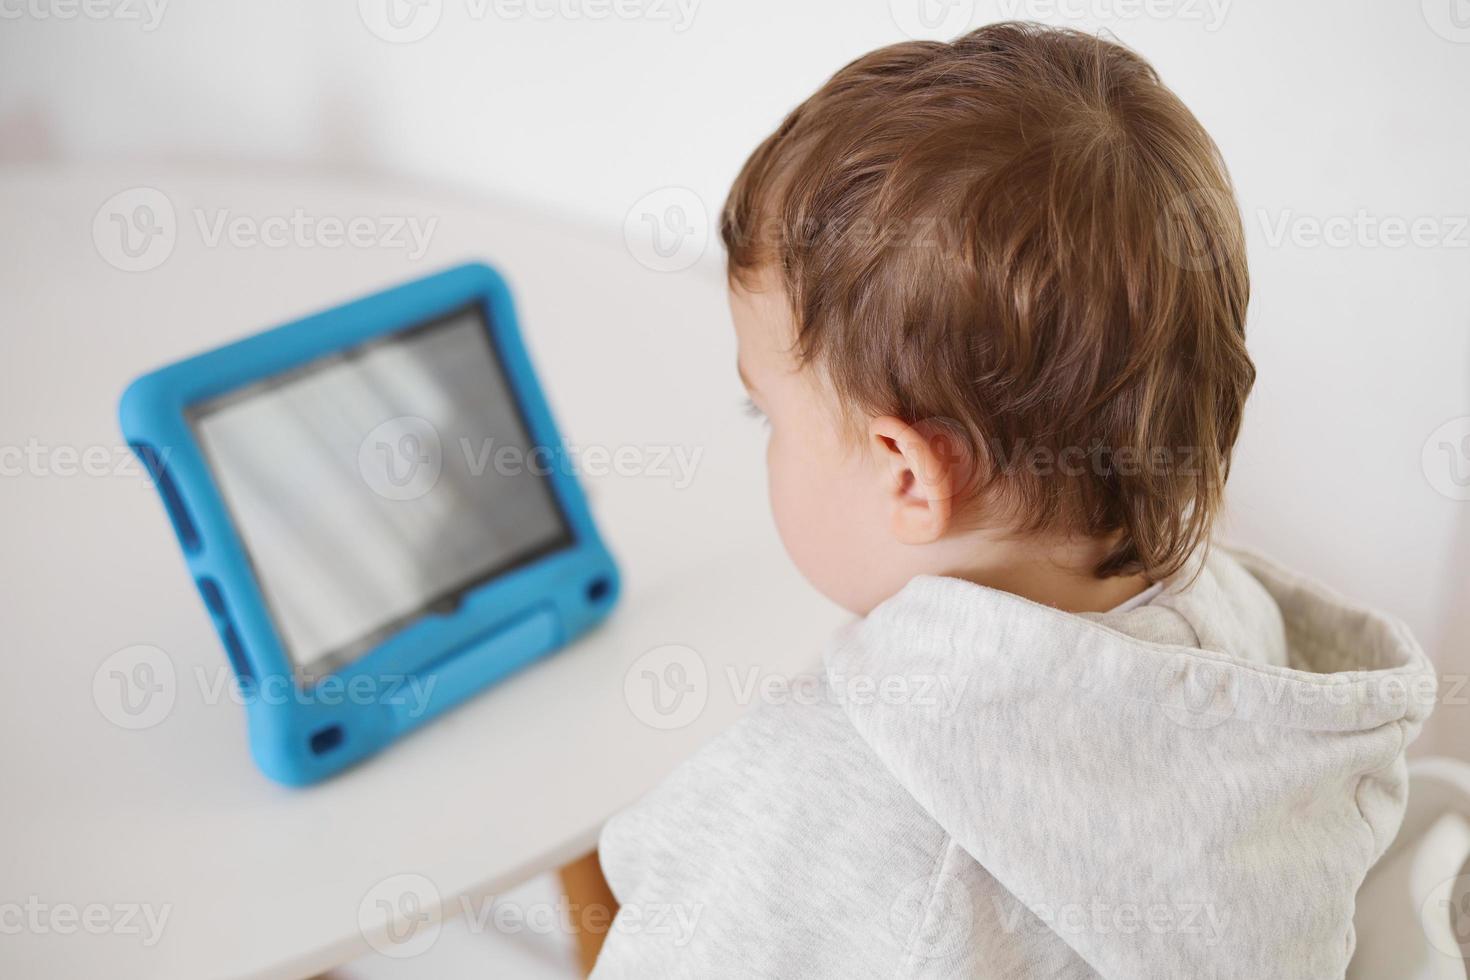 Happy little boy playing game on digital tablet at home. Portrait of a child at home watching cartoon on the tablet. Modern kid and education technology. photo